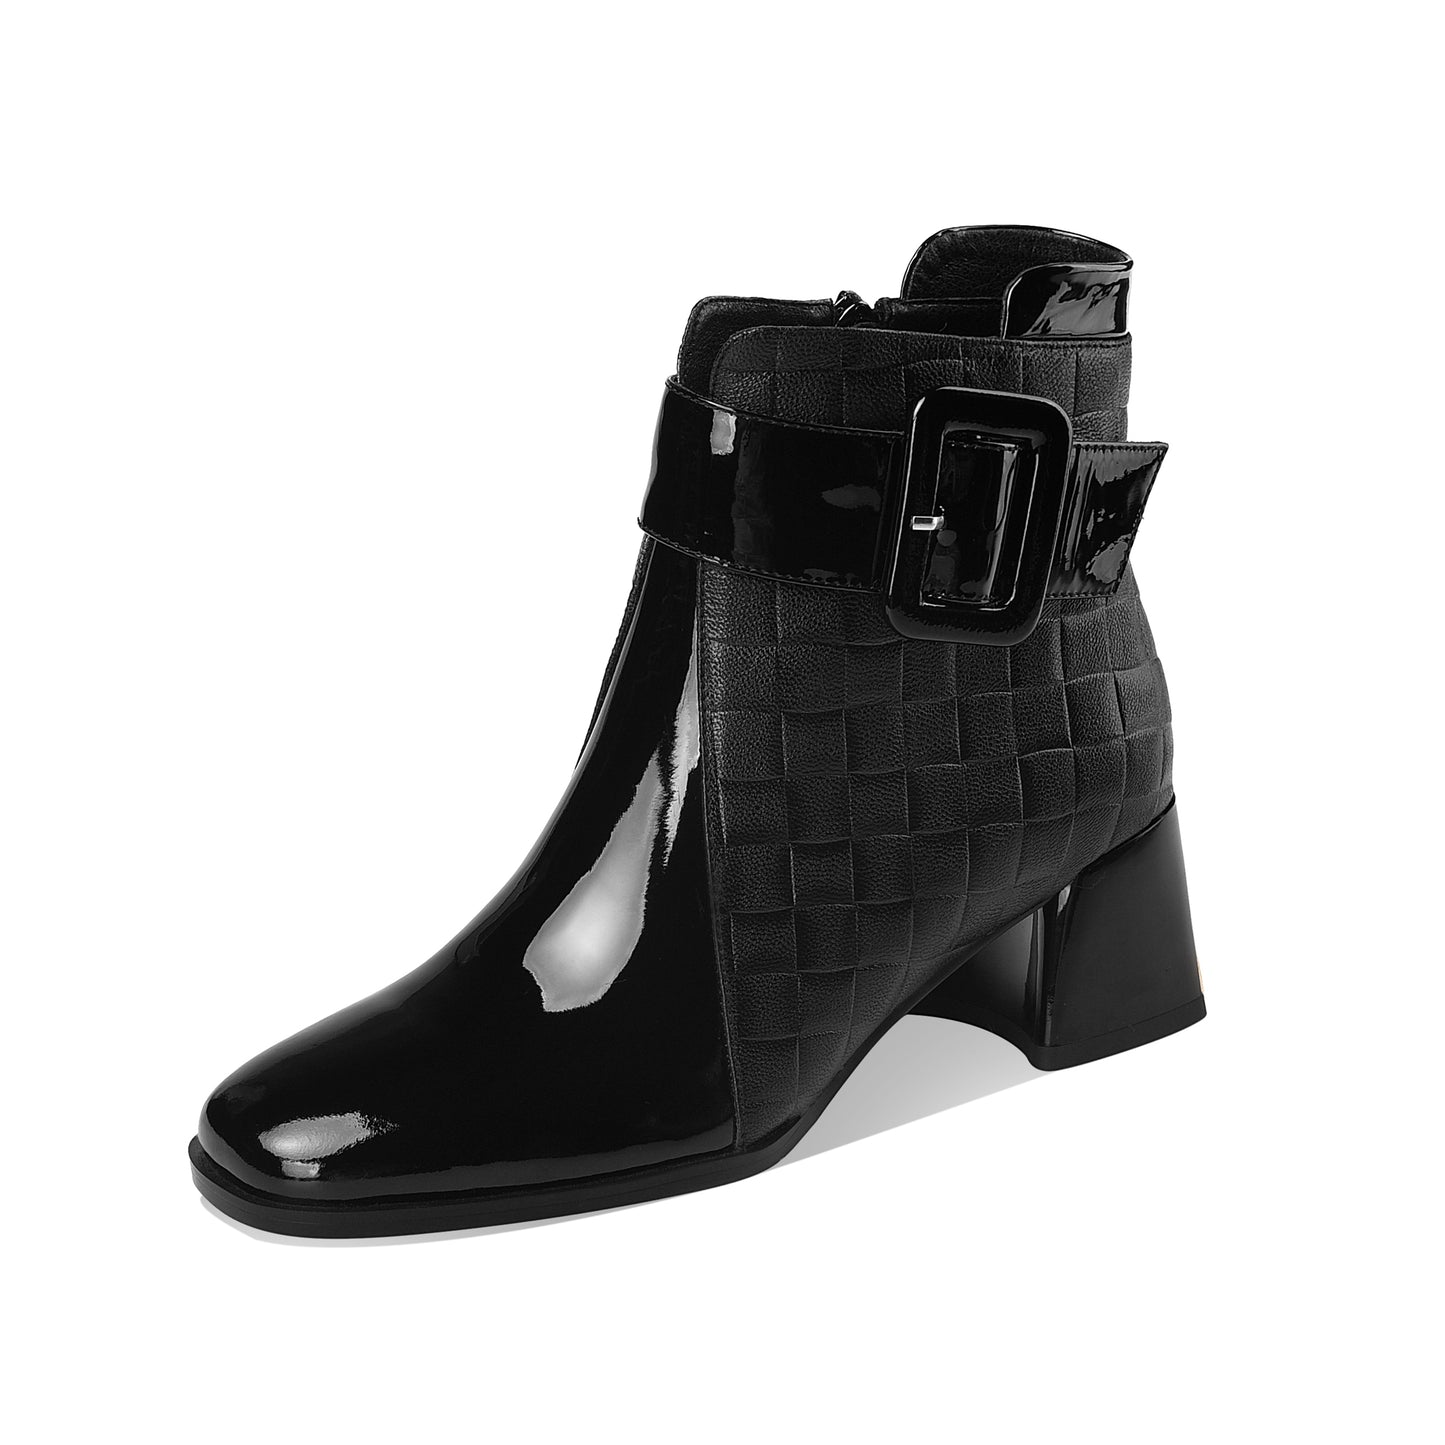 TinaCus Genuine Leather Women's Handmade Chic Buckle Decor Chunky Heel Side Zip Up Checkered Ankle Boots